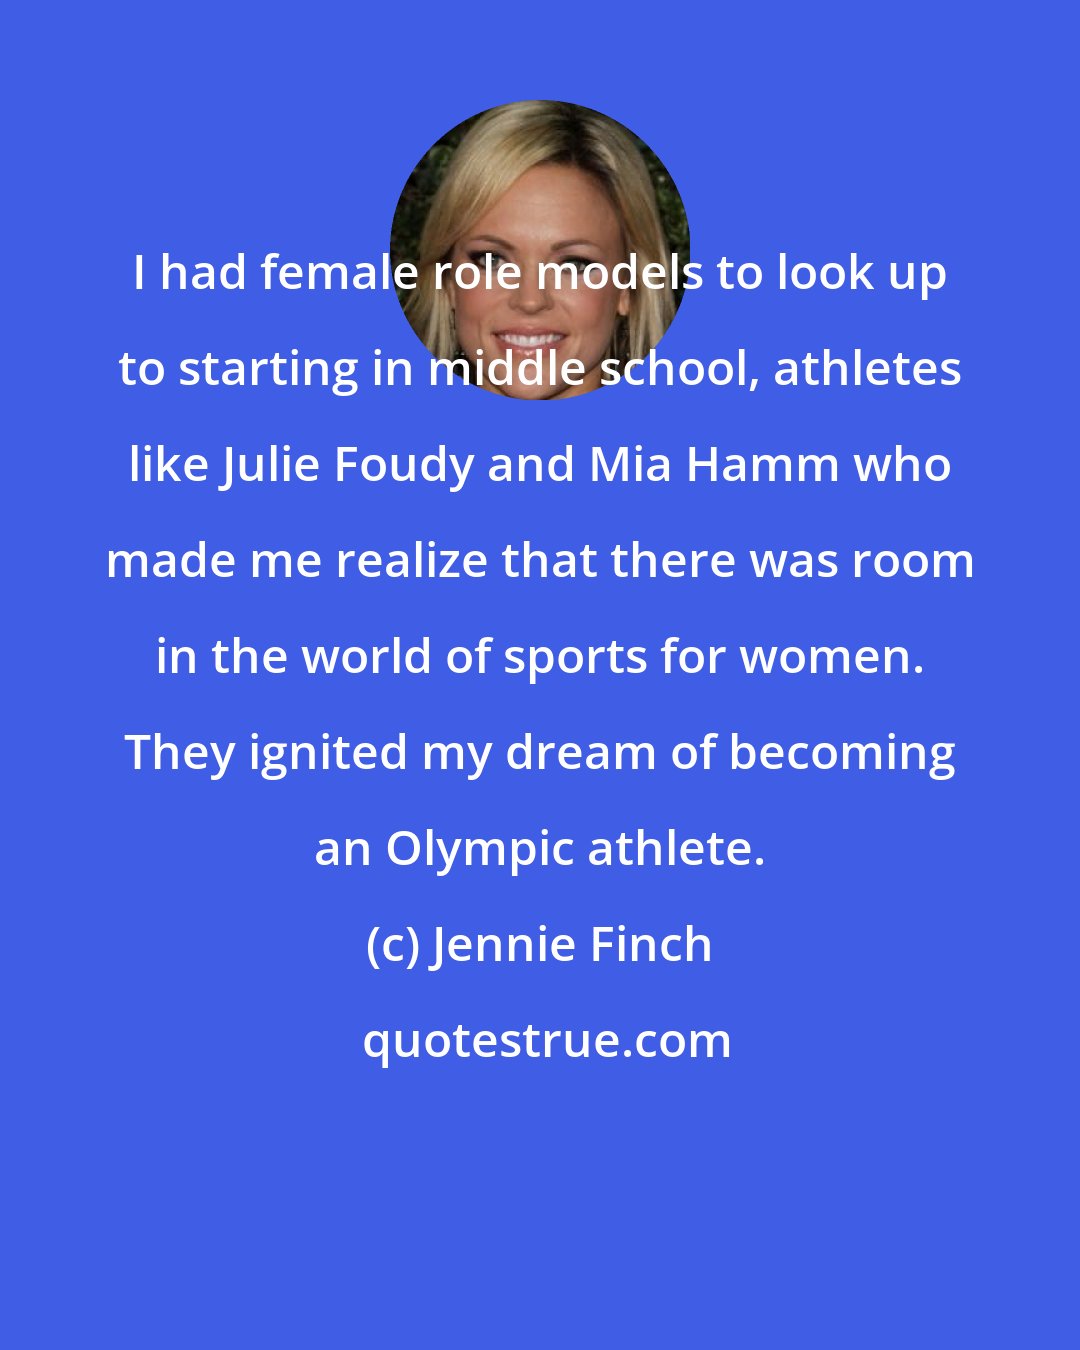 Jennie Finch: I had female role models to look up to starting in middle school, athletes like Julie Foudy and Mia Hamm who made me realize that there was room in the world of sports for women. They ignited my dream of becoming an Olympic athlete.